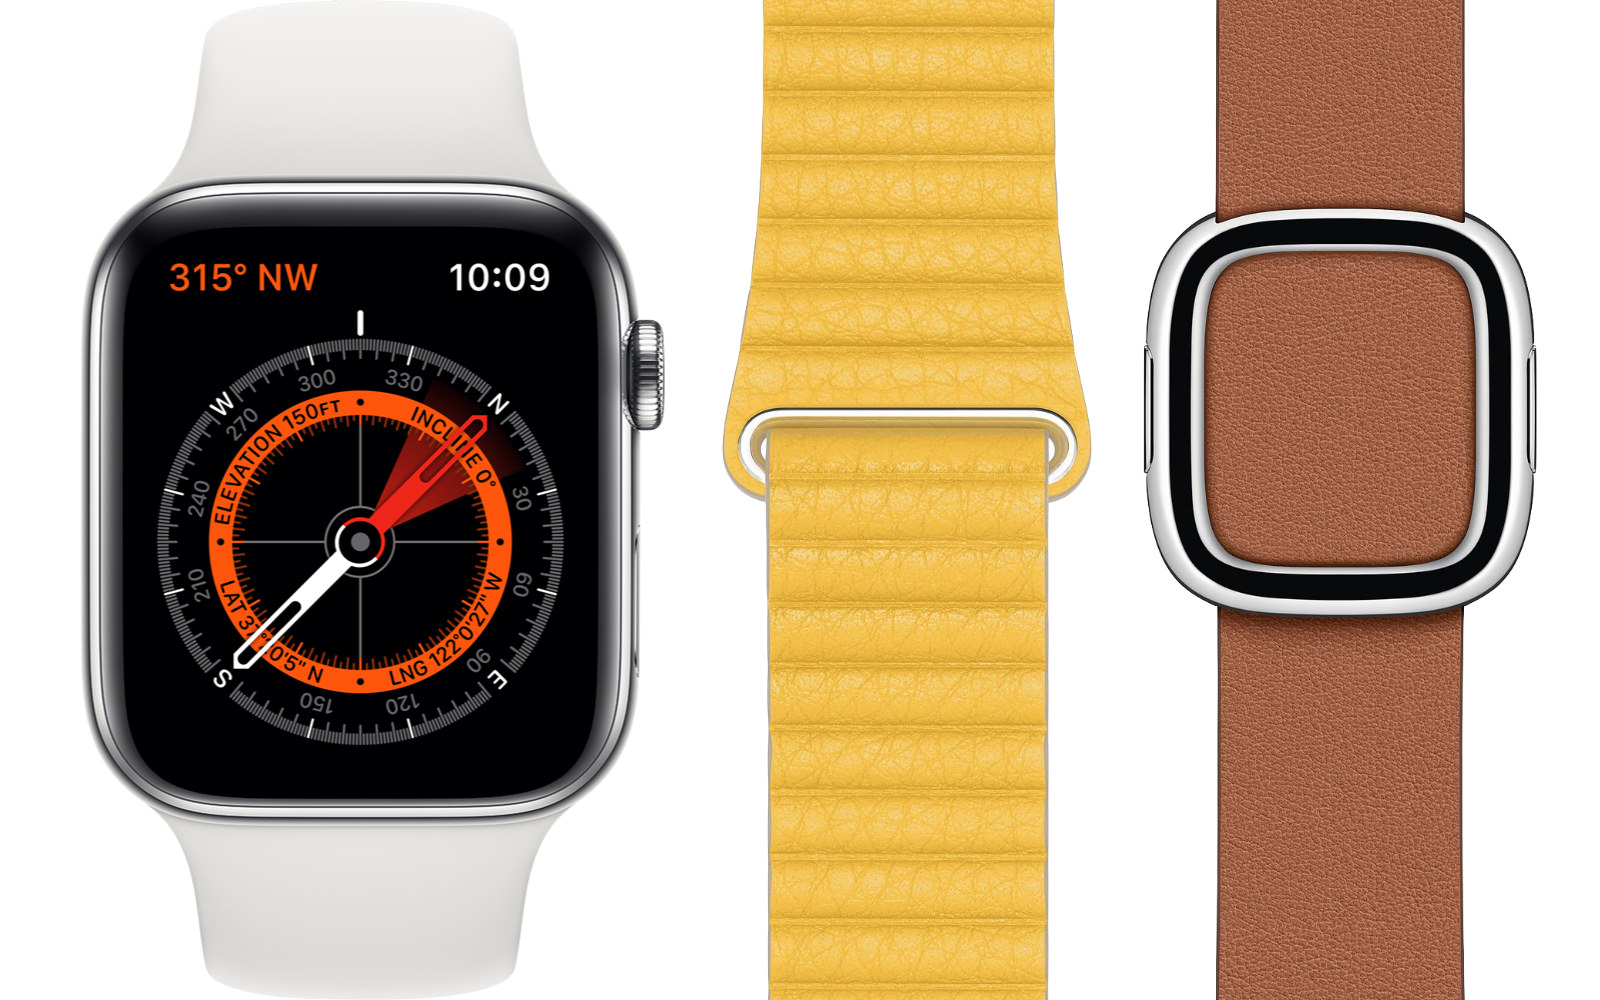 Apple-Watch-Series-5-Compass-and-compatible-bands.jpg